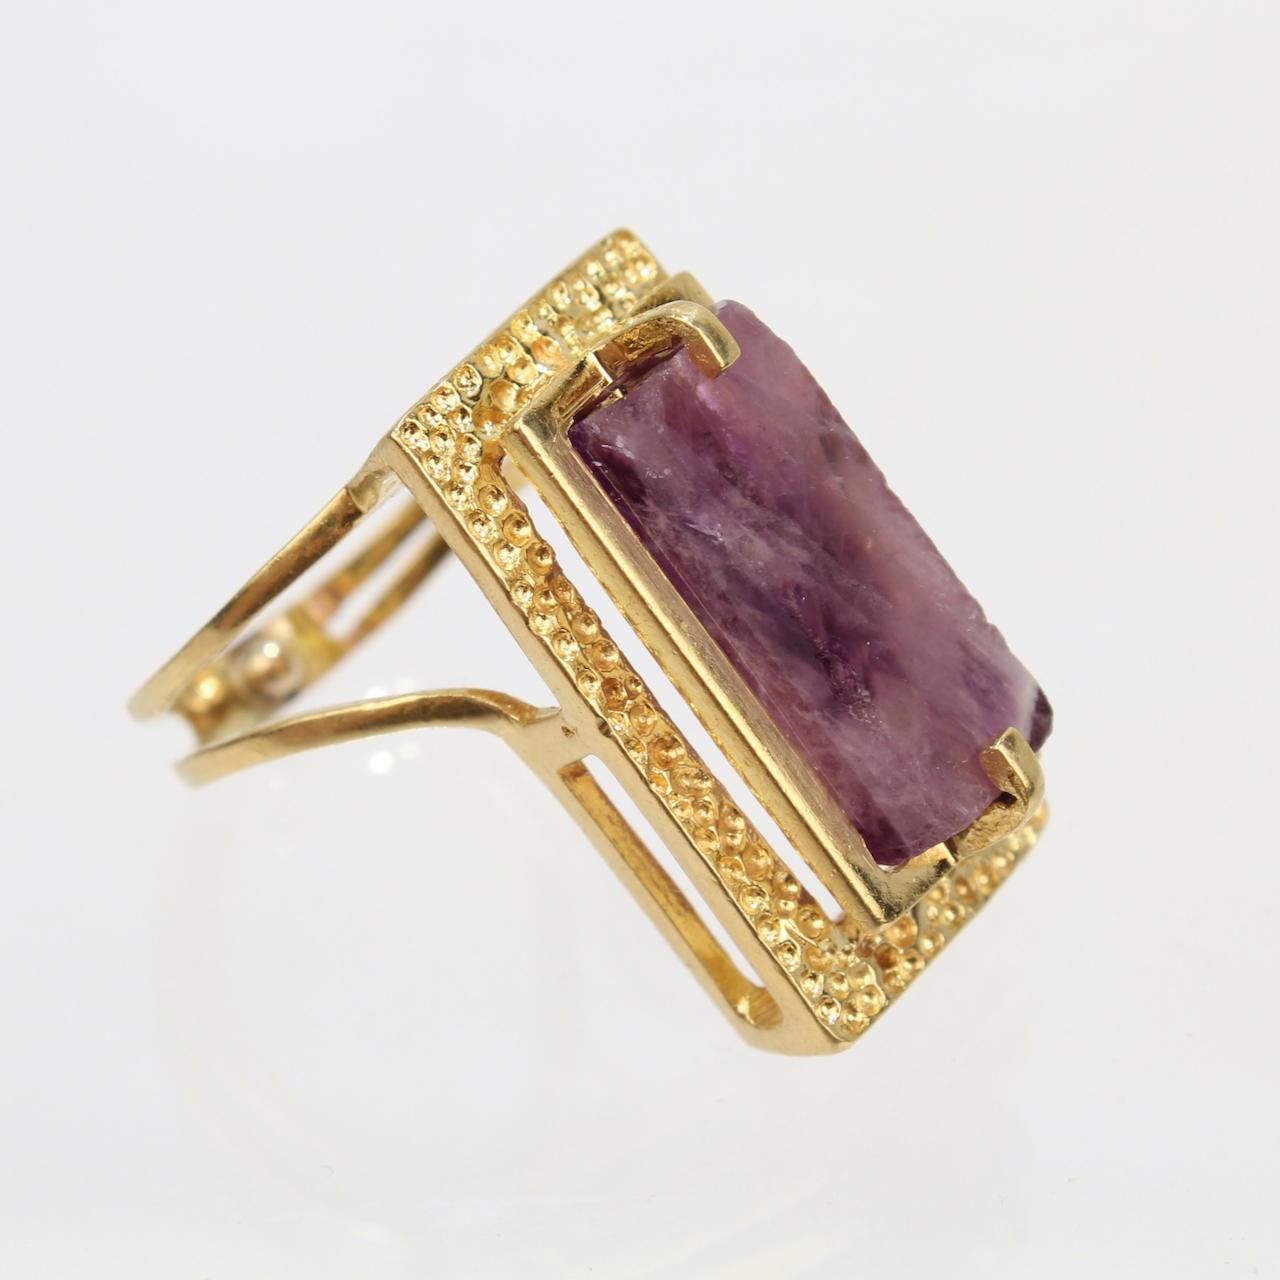 Modernist Asymmetrical 18k Gold and Rough Cut Amethyst Gemstone Cocktail Ring For Sale 3